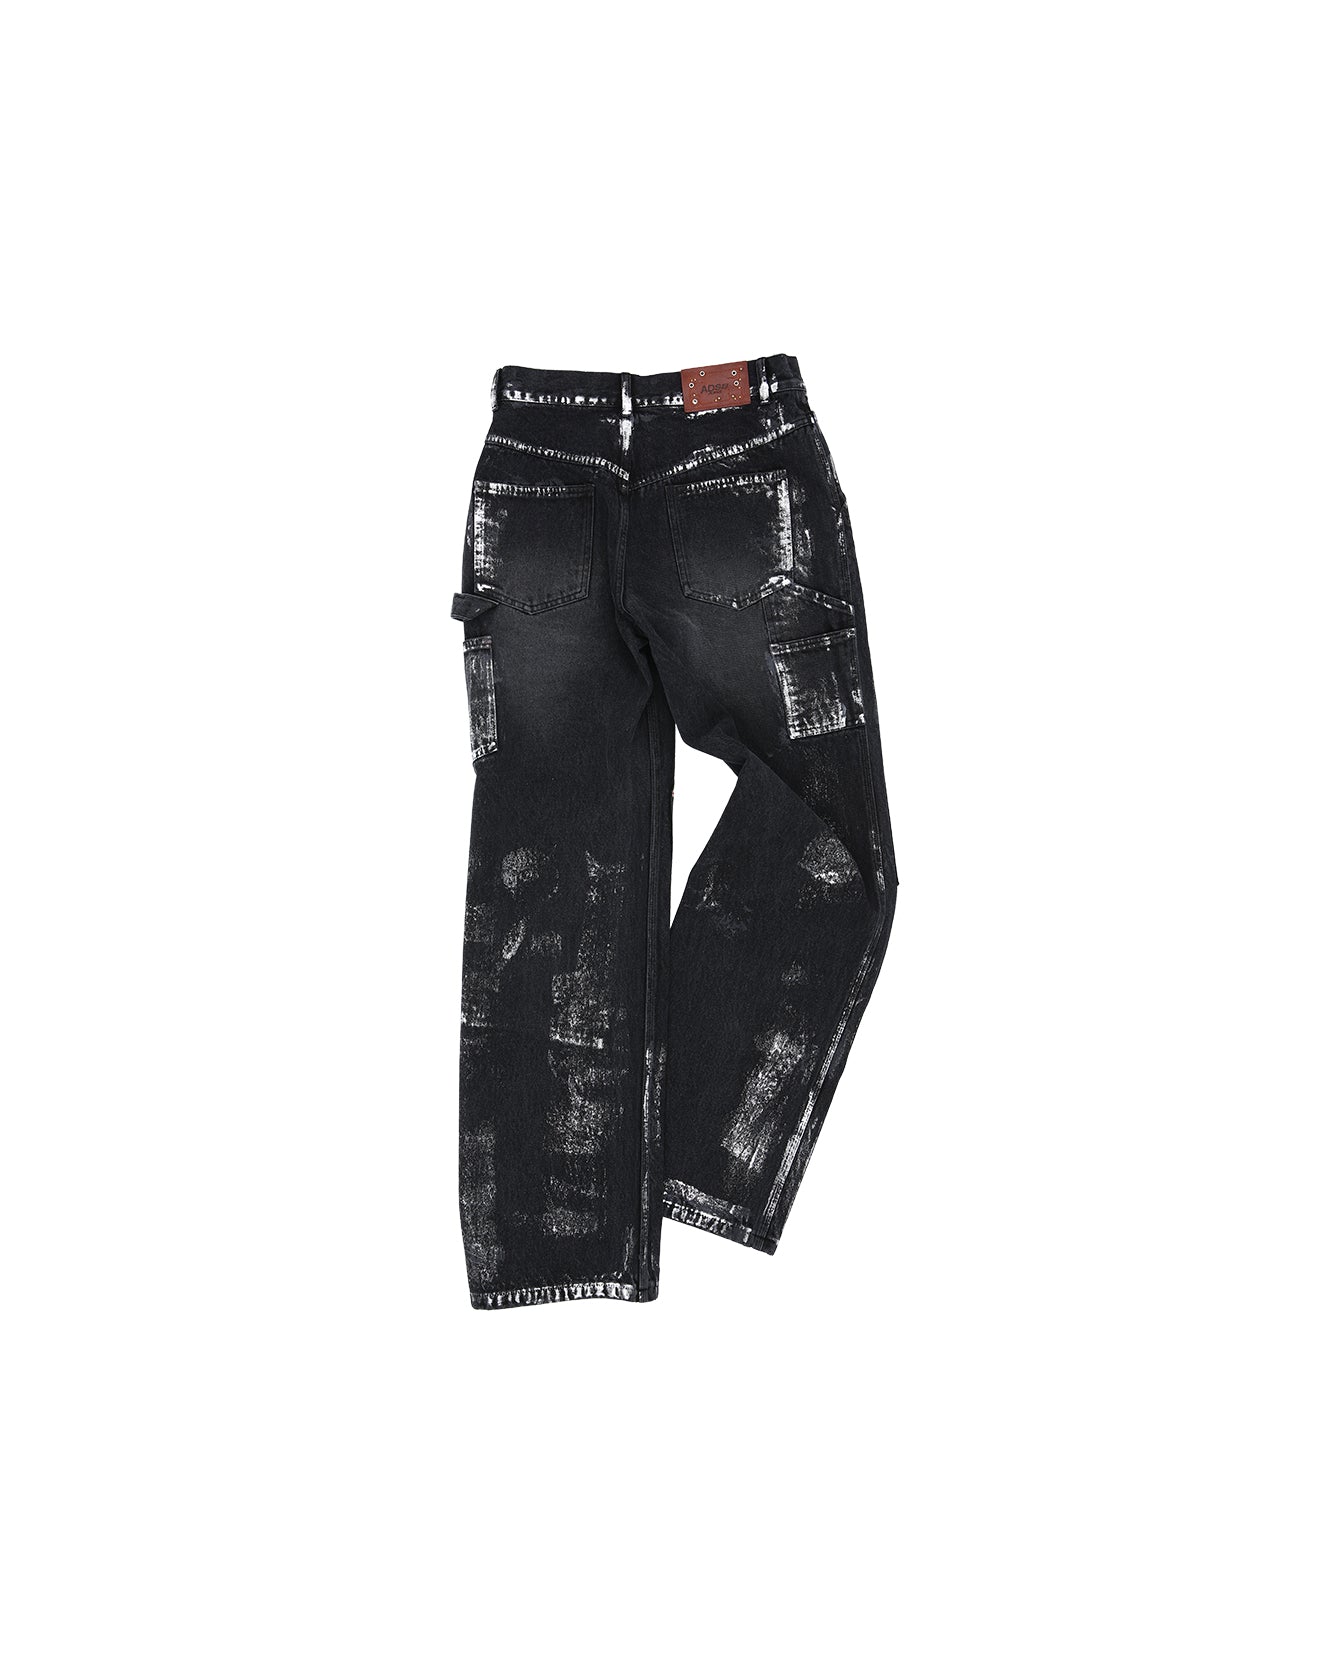 WAX COATED CARPENTER WIDE-LEG apa685m(BLACK) – Andersson JEANS Bell